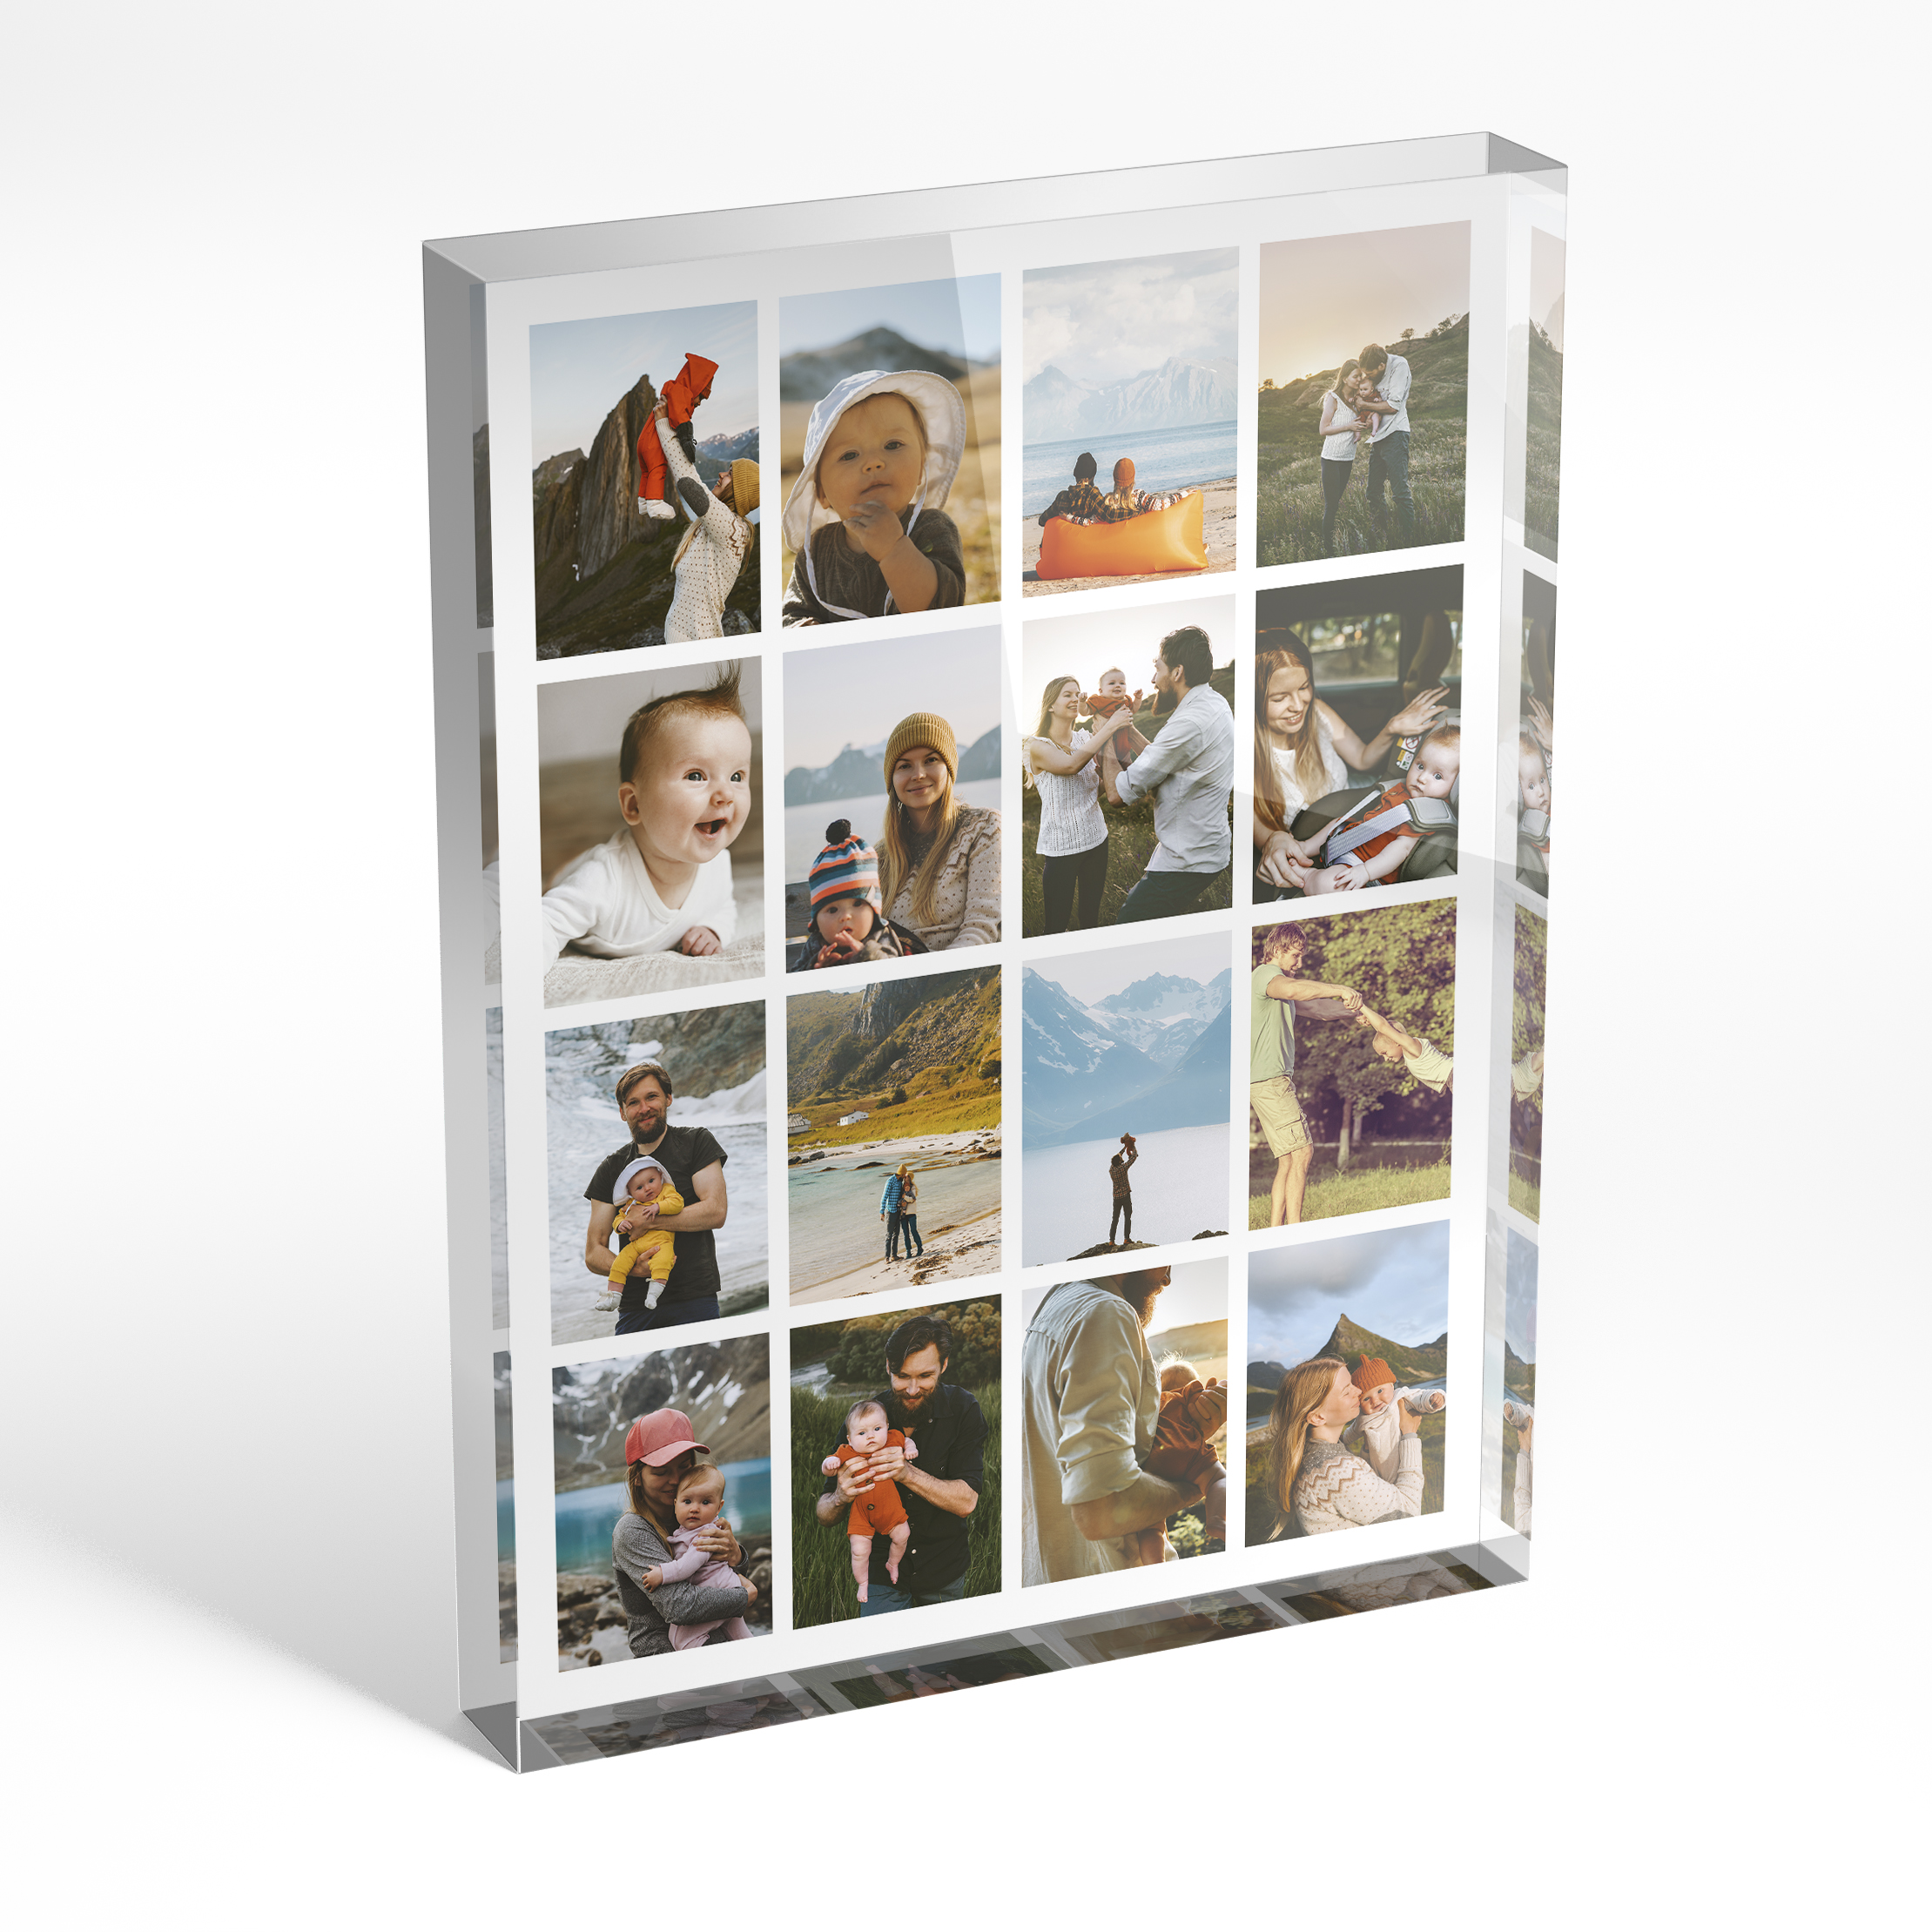 A front side view of a portrait layout Online acrylic photo blocks with space for 10+ photos. Thiis design is named 'Spectrum of Moments'. 